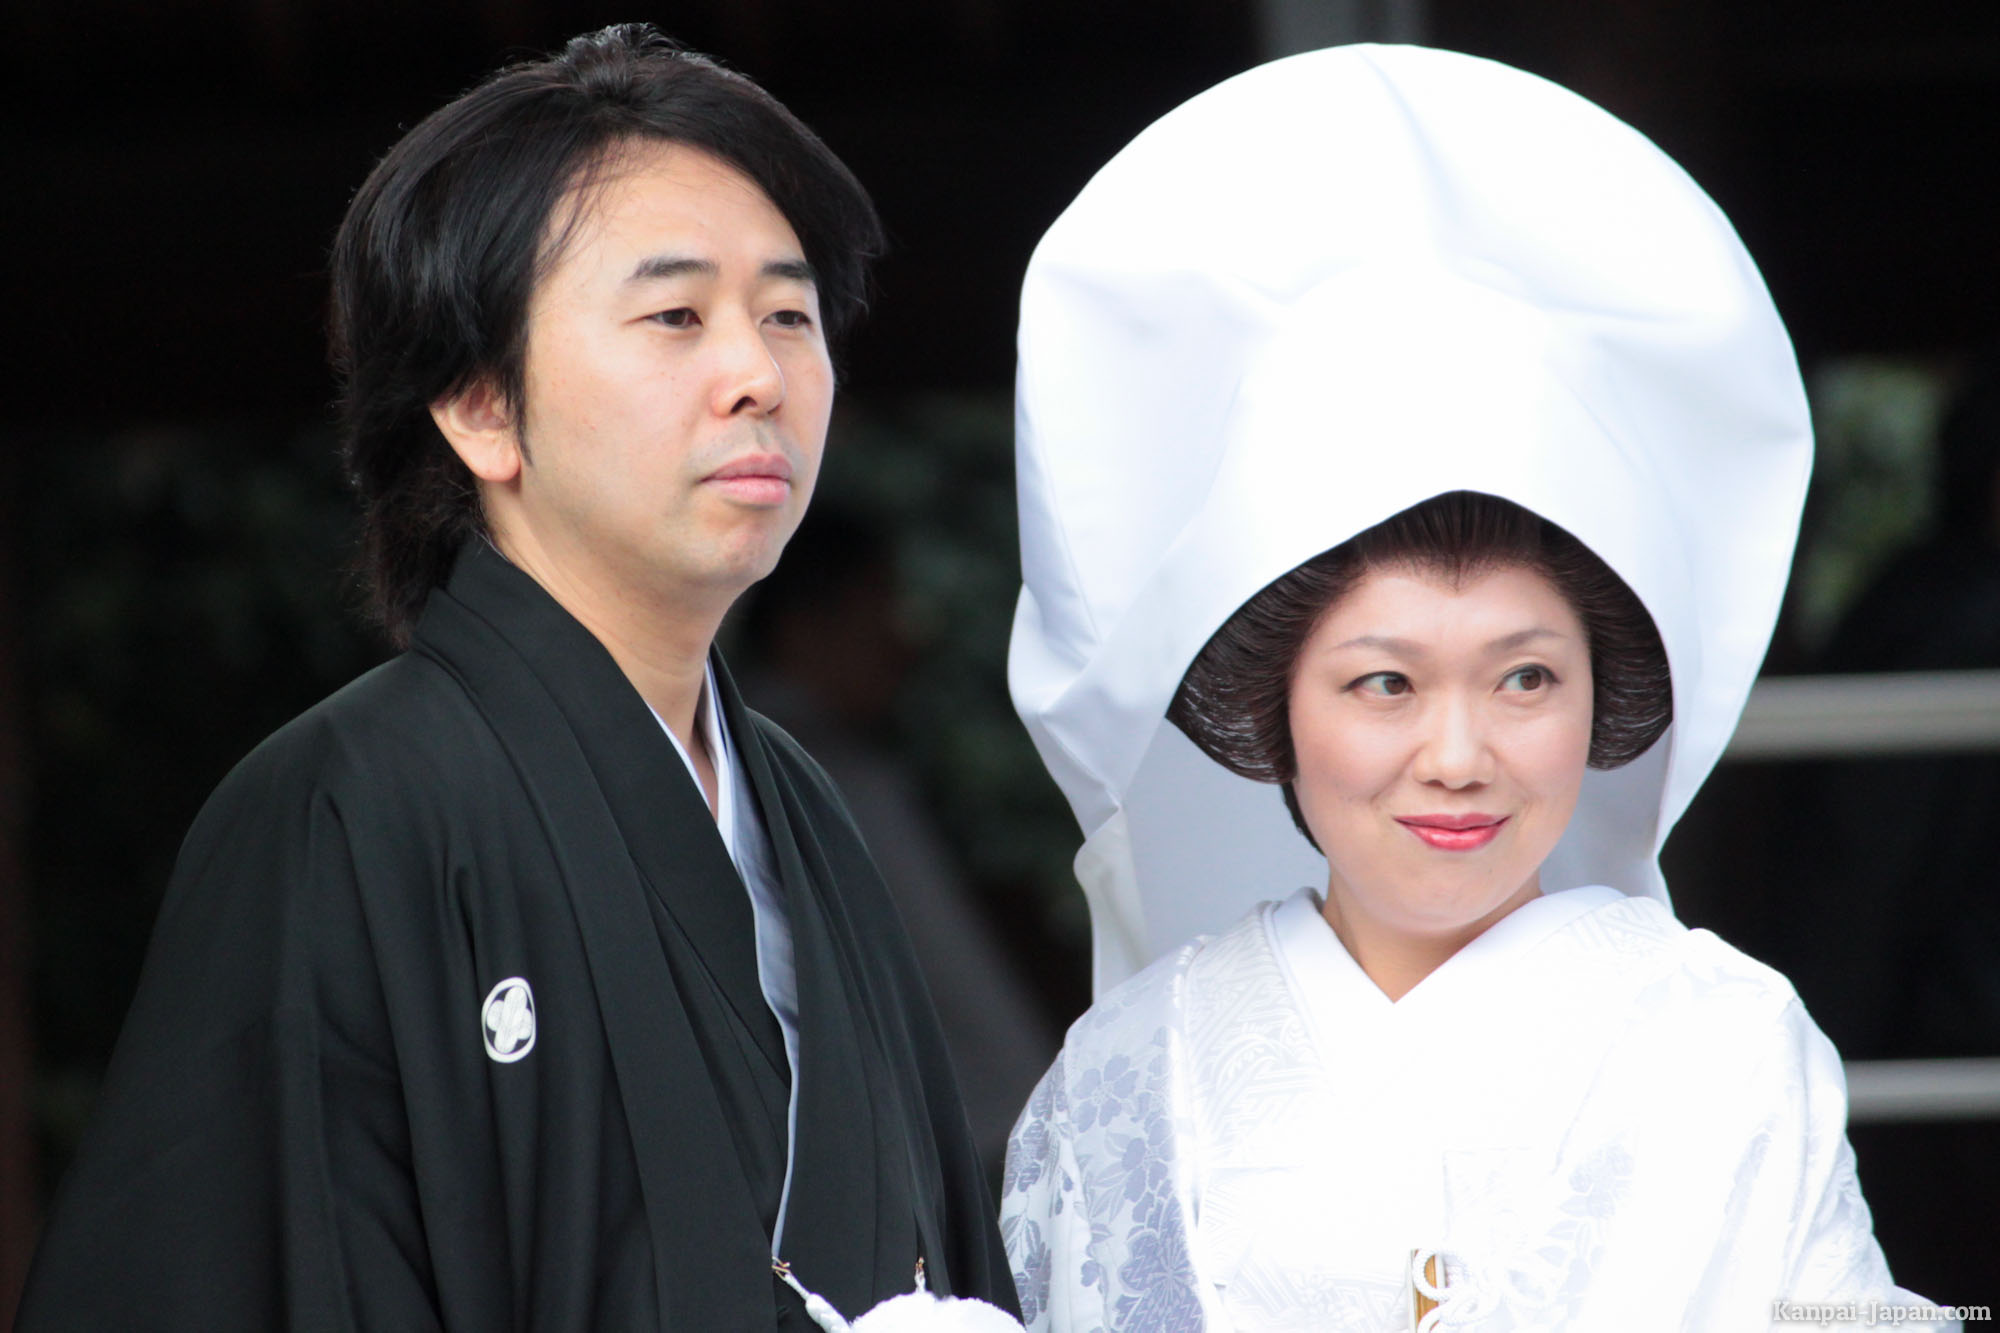 Wedding traditions in Japan